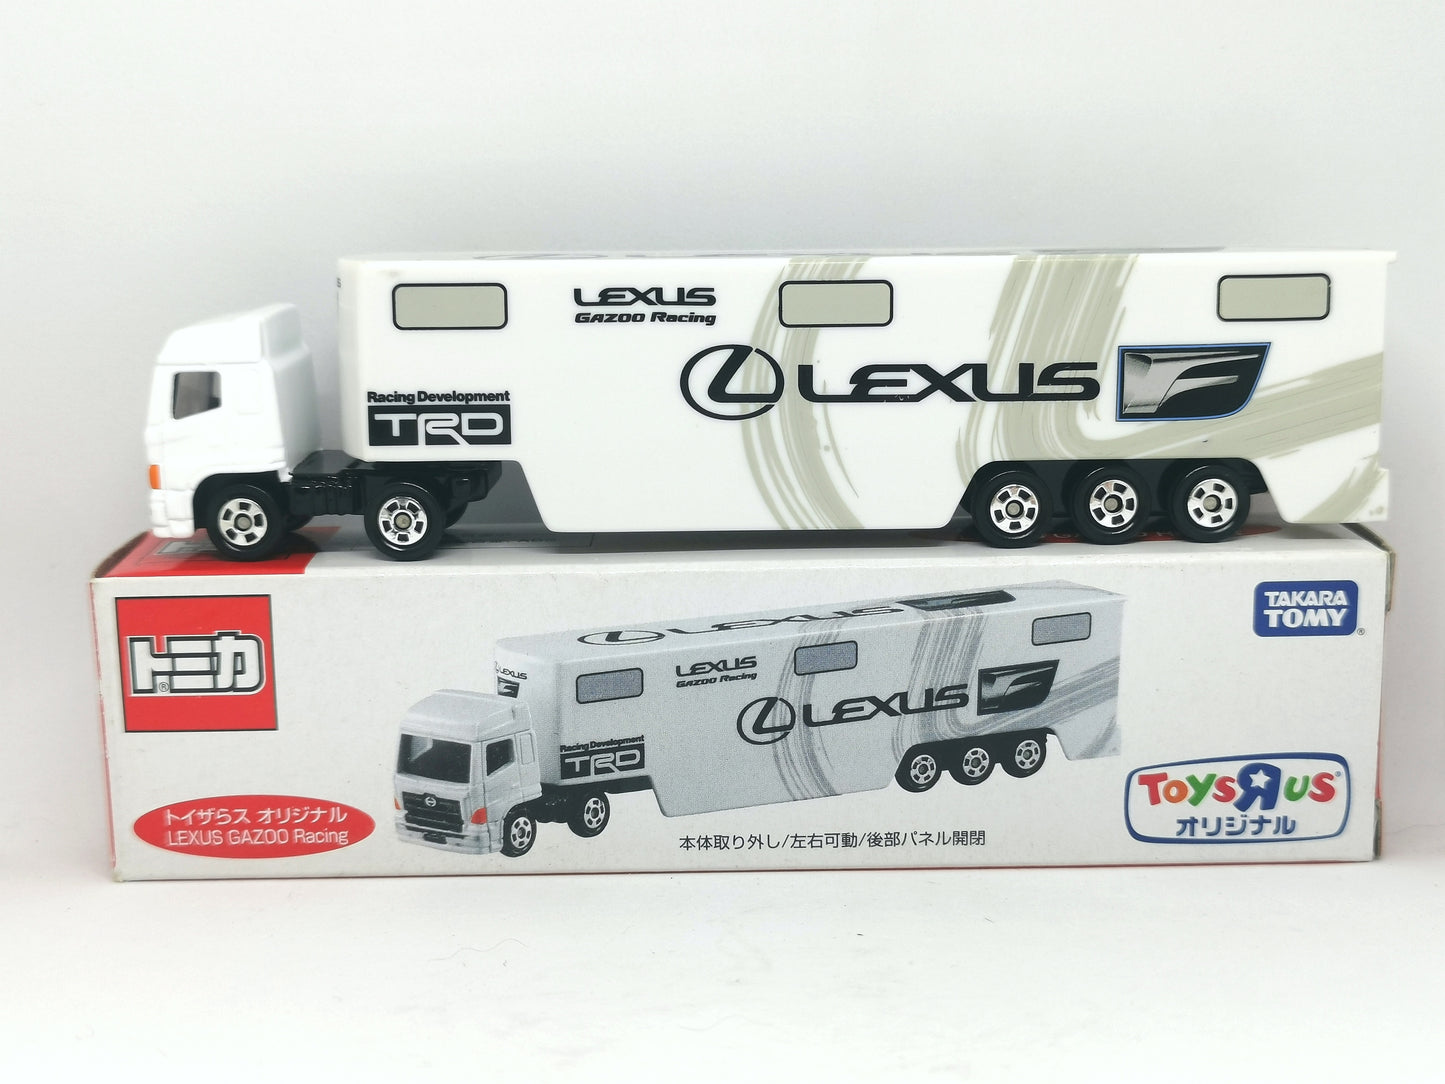 Tomica Toys"R"us exclusive TRD Lexus Gazoo Racing Transporter New in box